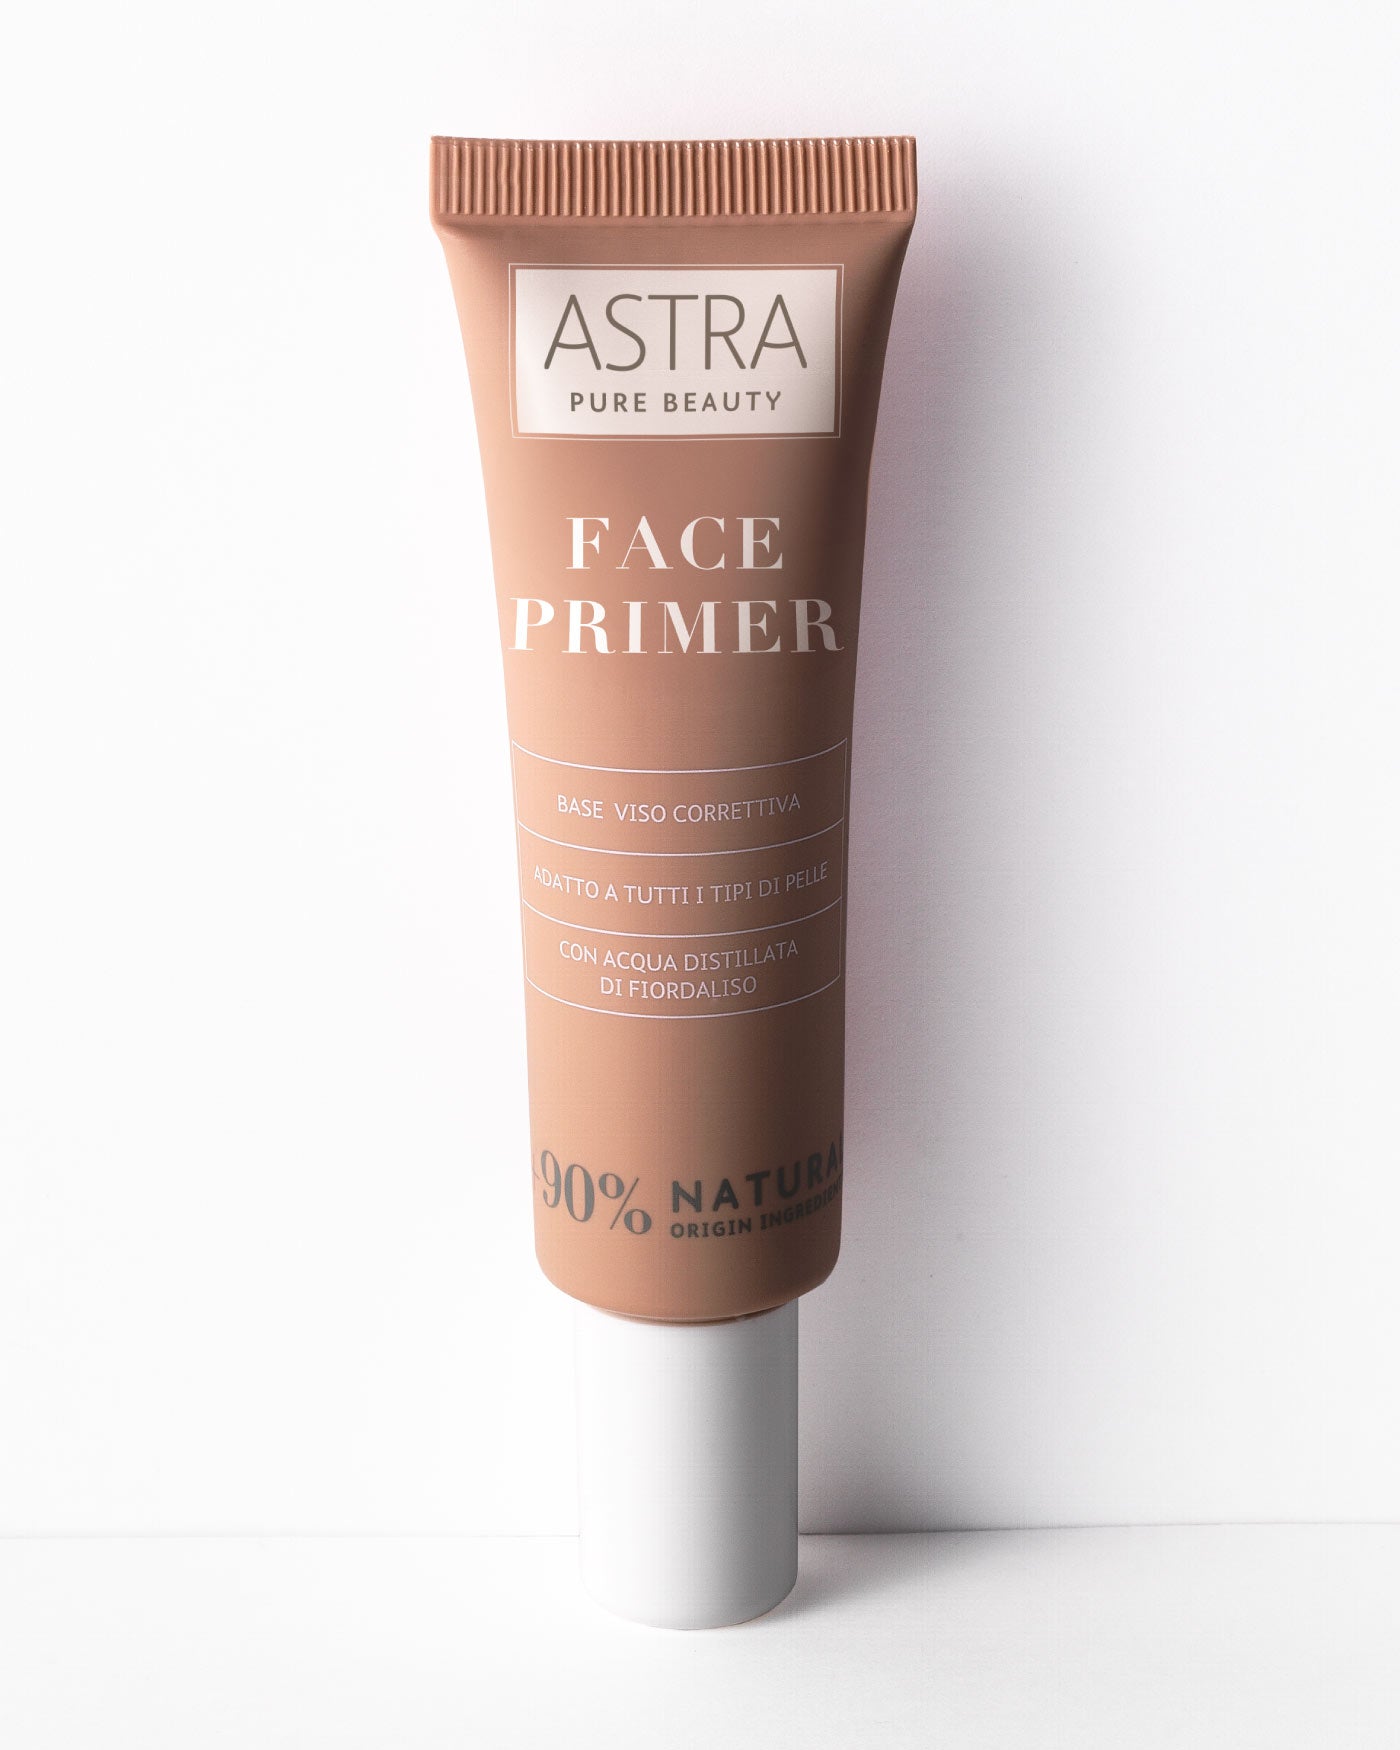 PURE BEAUTY FACE PRIMER - Pure Beauty - Astra Make-Up